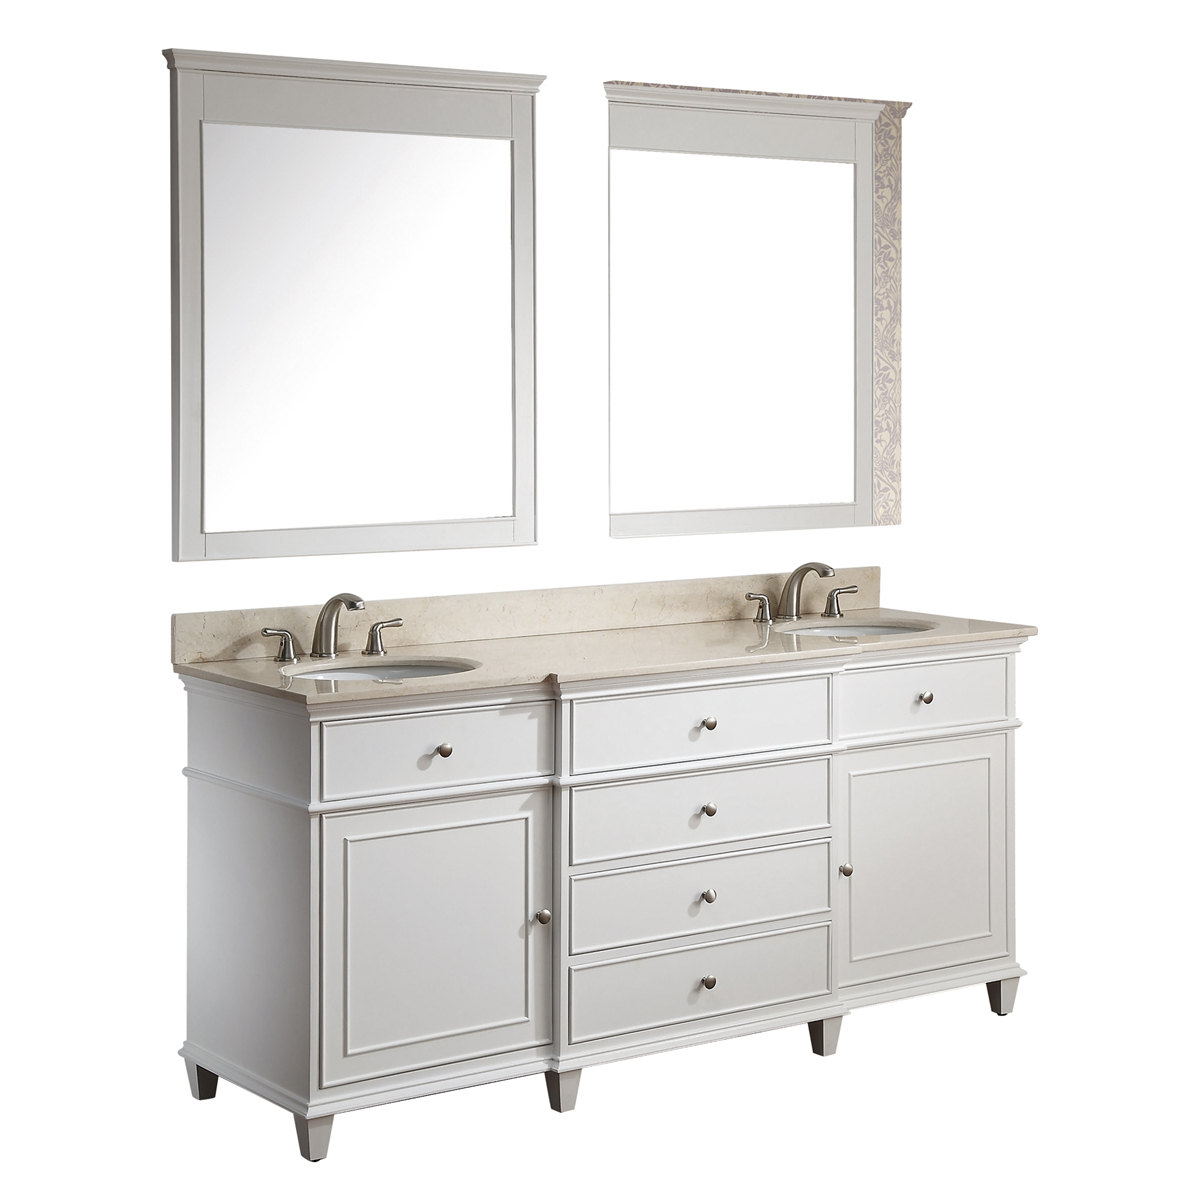 61" Cesarina Double Vanity in White - With optional mirrors